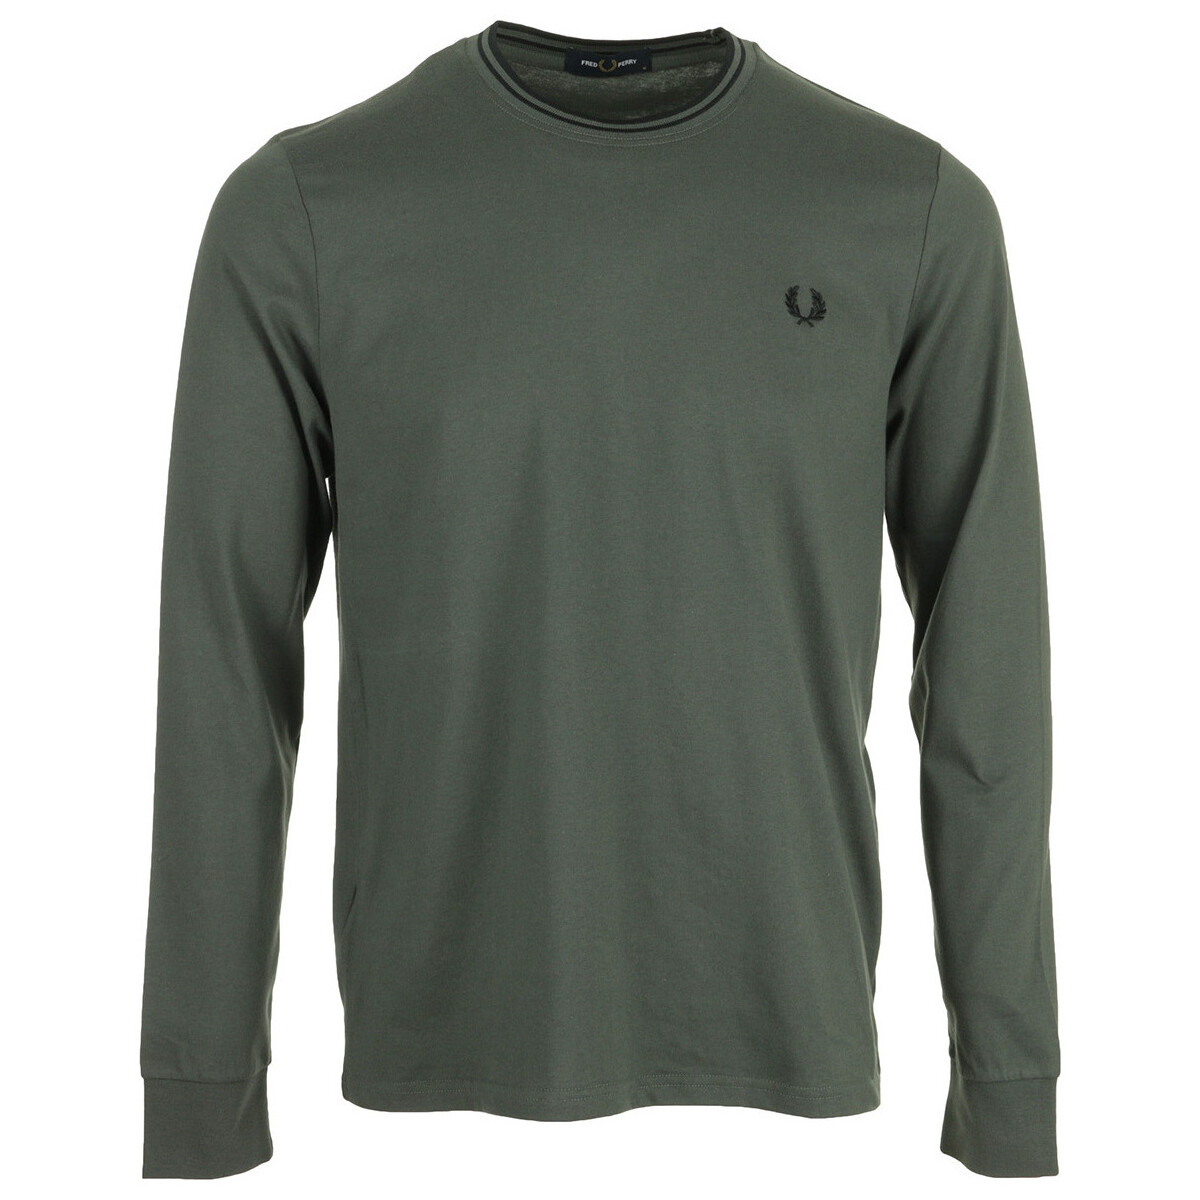 Vêtements Homme T-shirts manches courtes Fred Perry Twin Tipped Vert